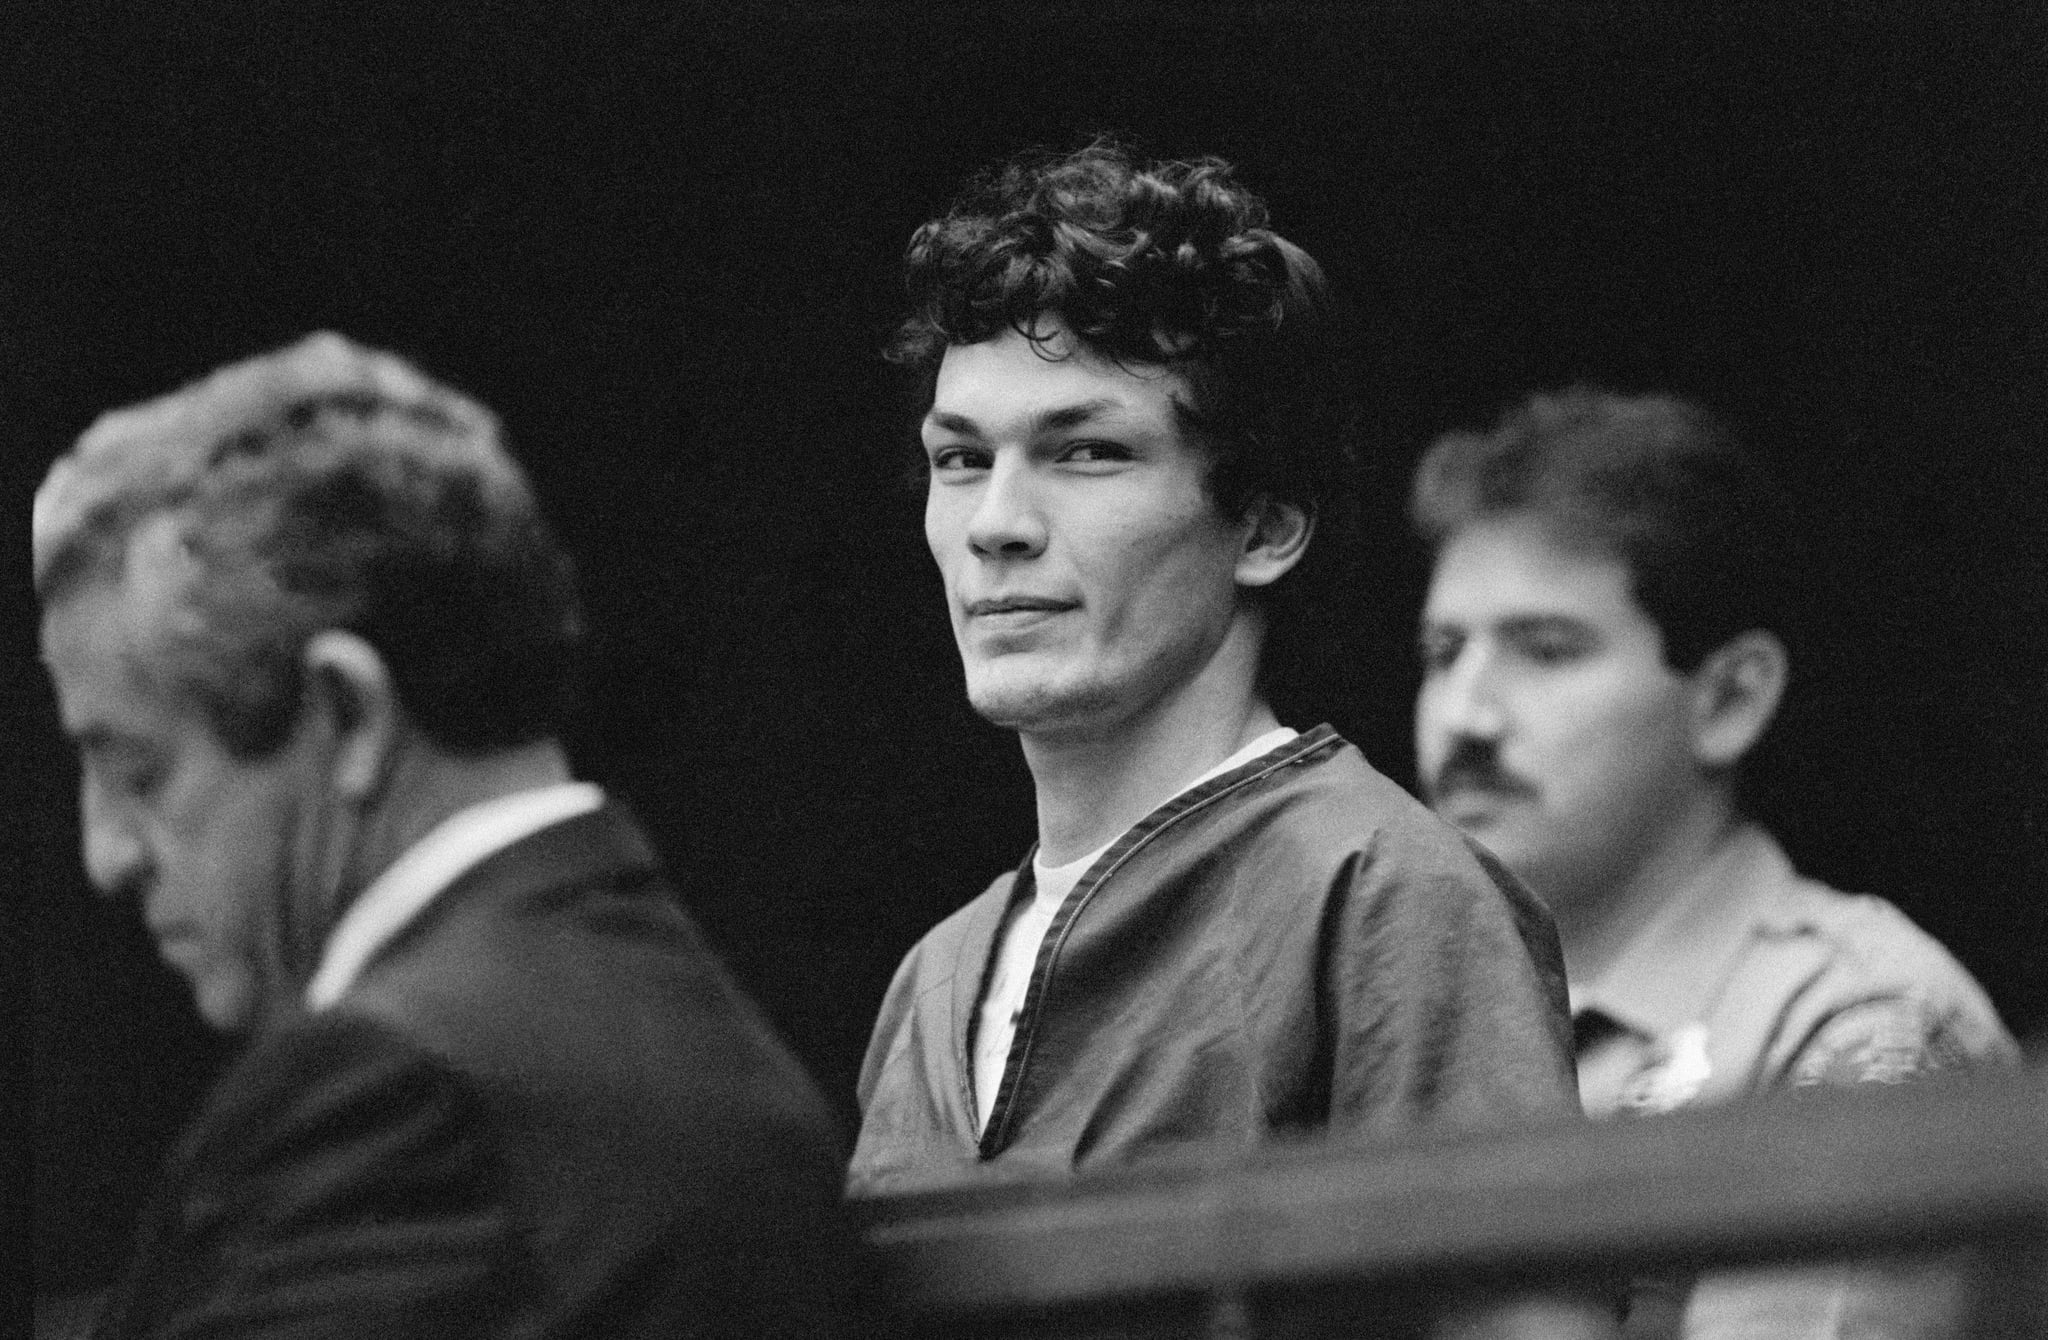 Richard Ramirez, accused of being the serial killer called the 